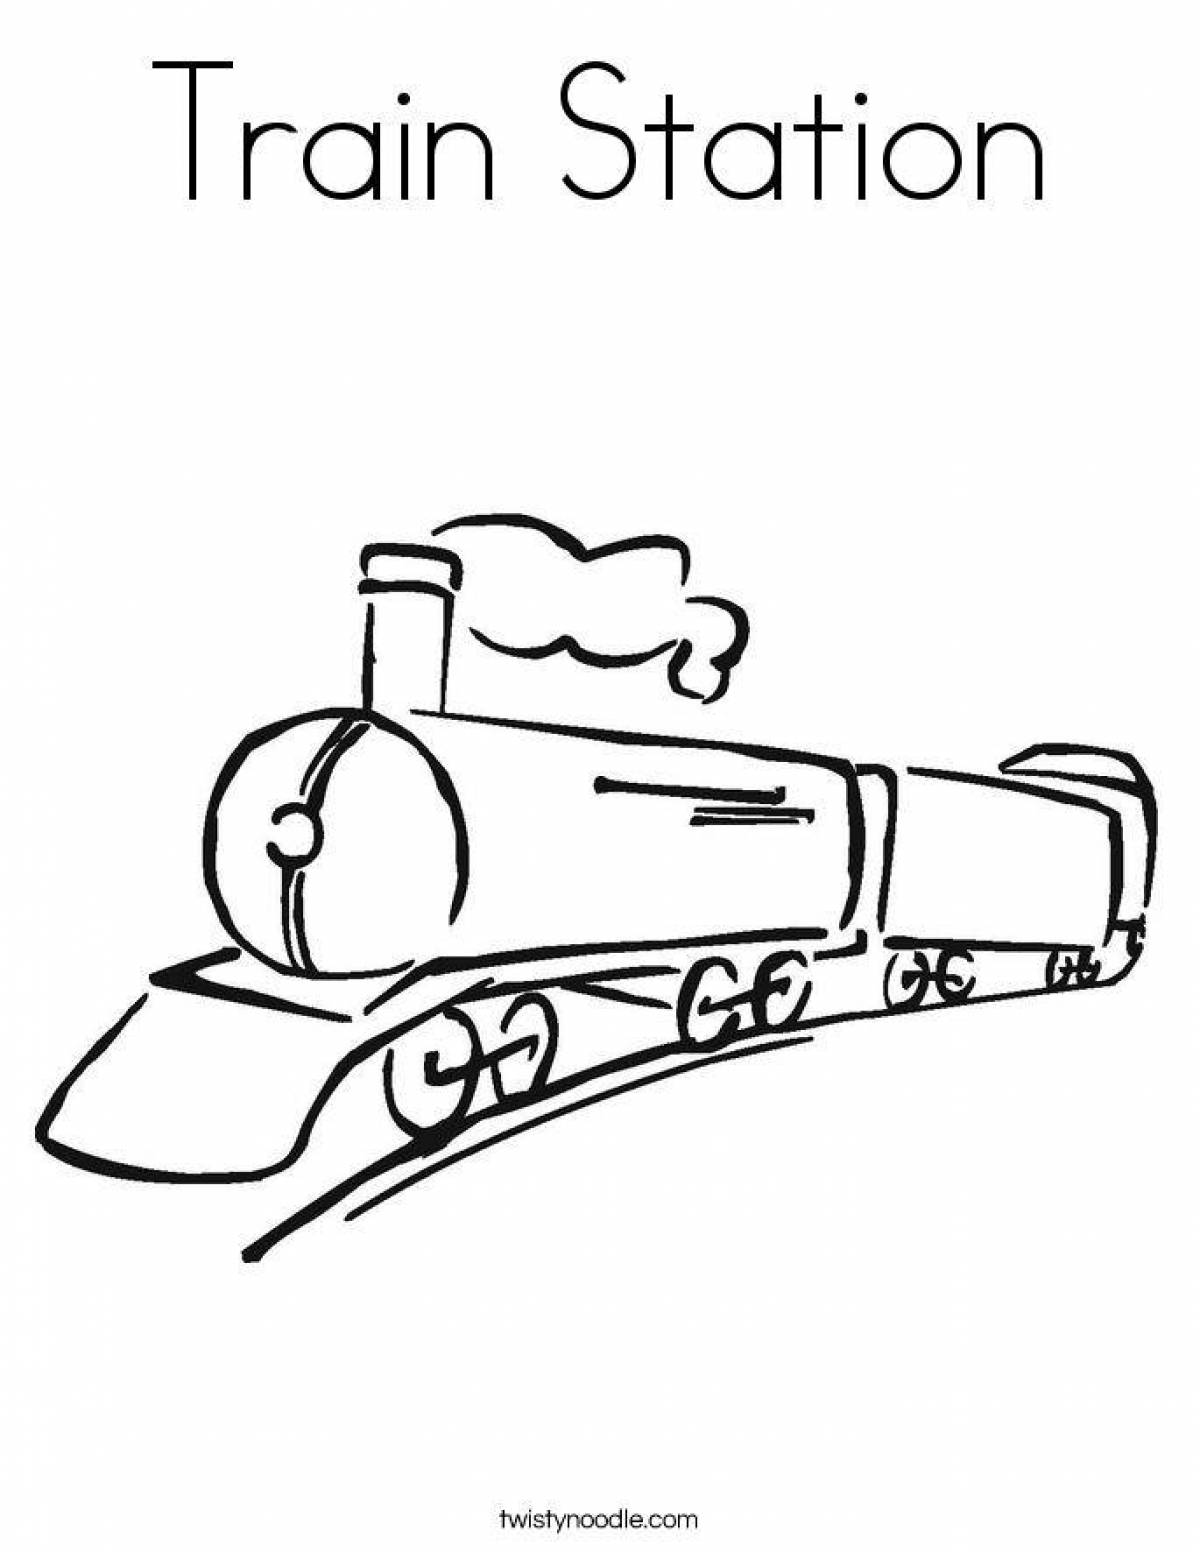 Crazy train eater coloring page